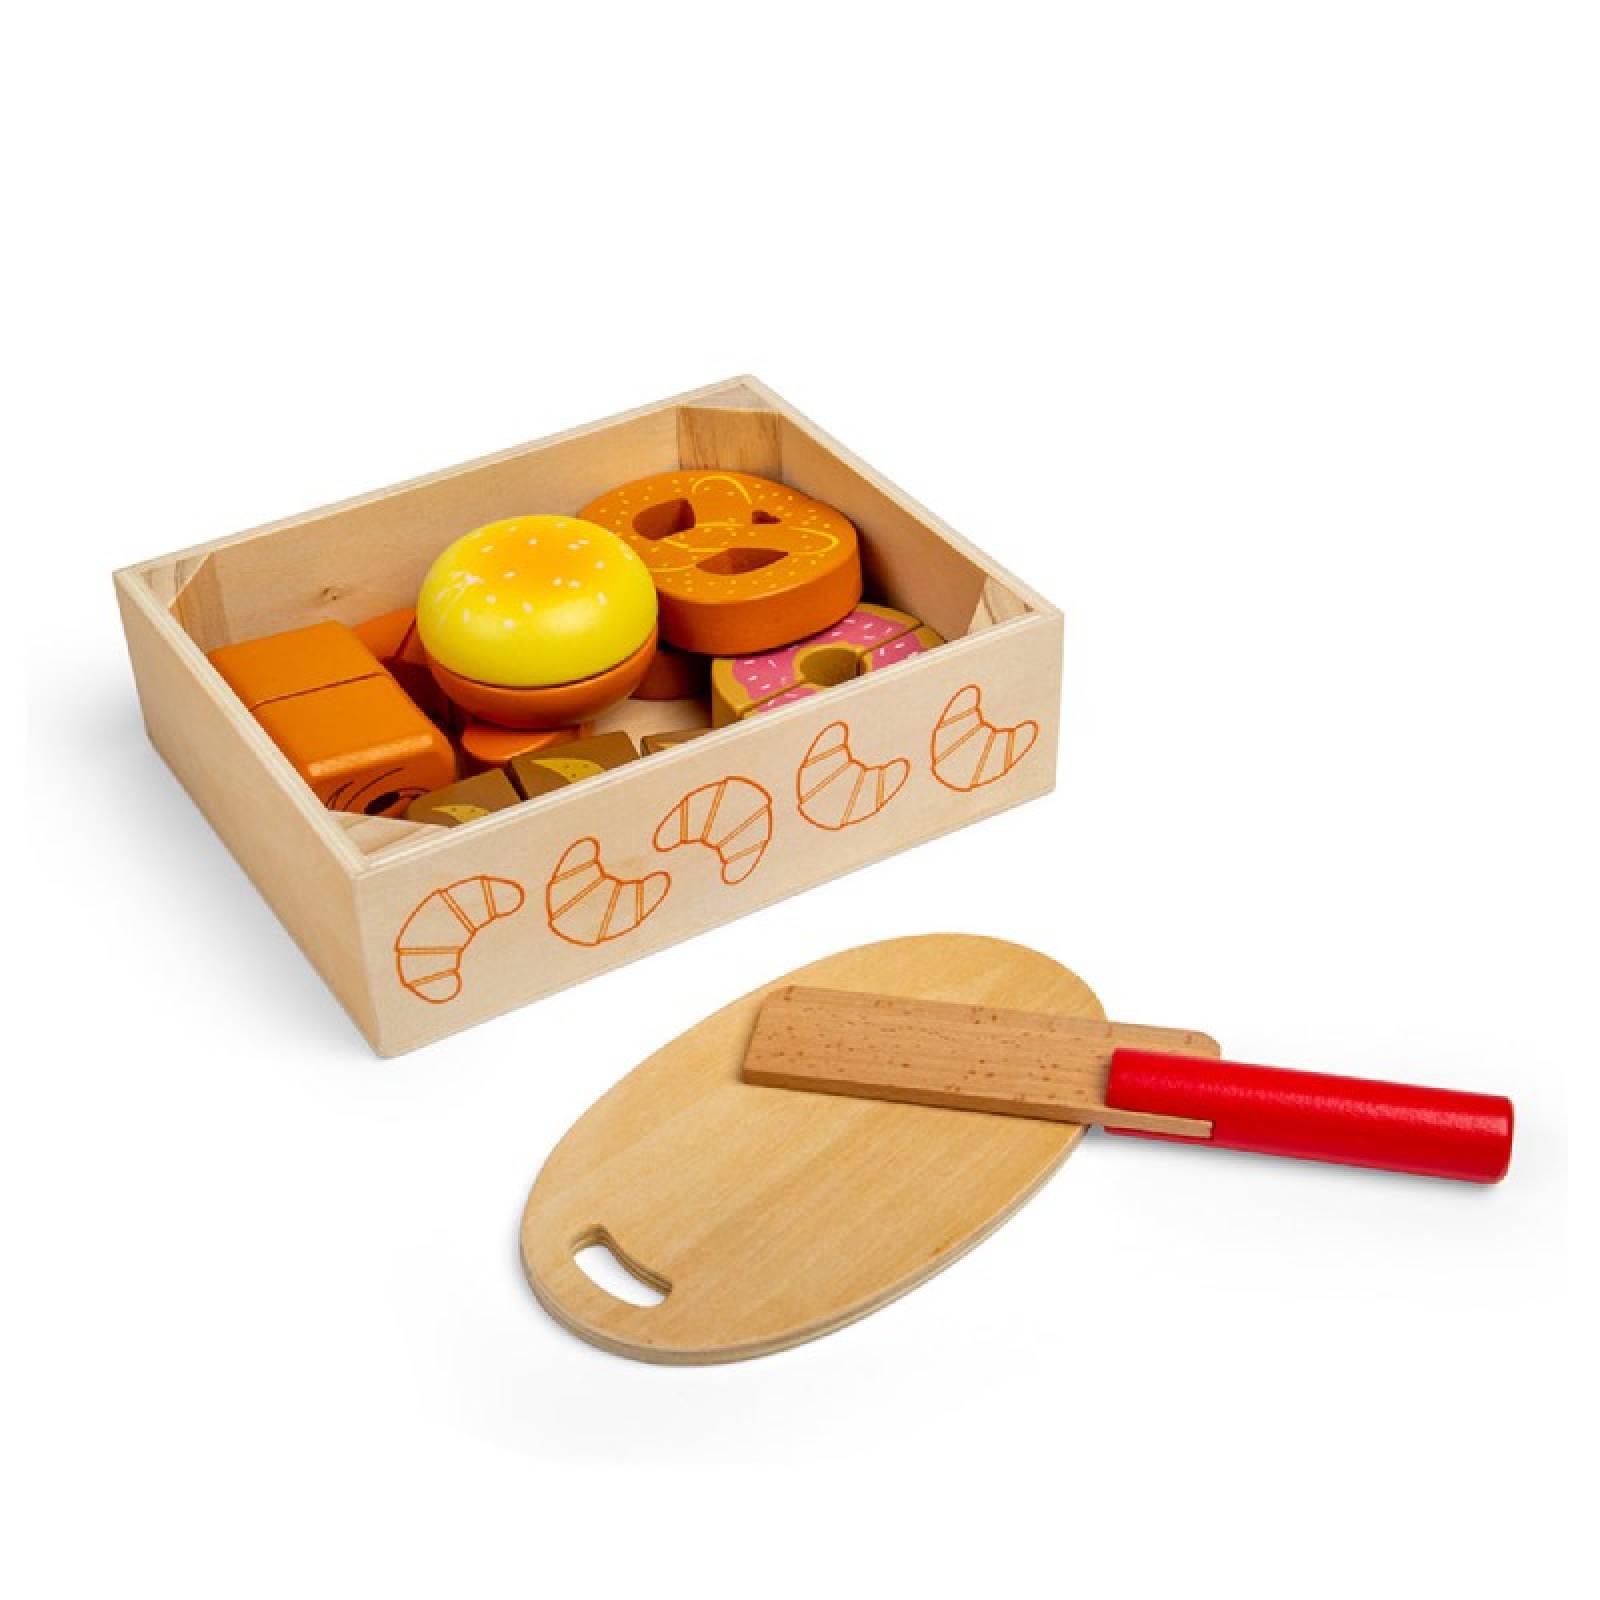 Cutting Bread & Pastries In Wooden Crate Toy Food 18m+